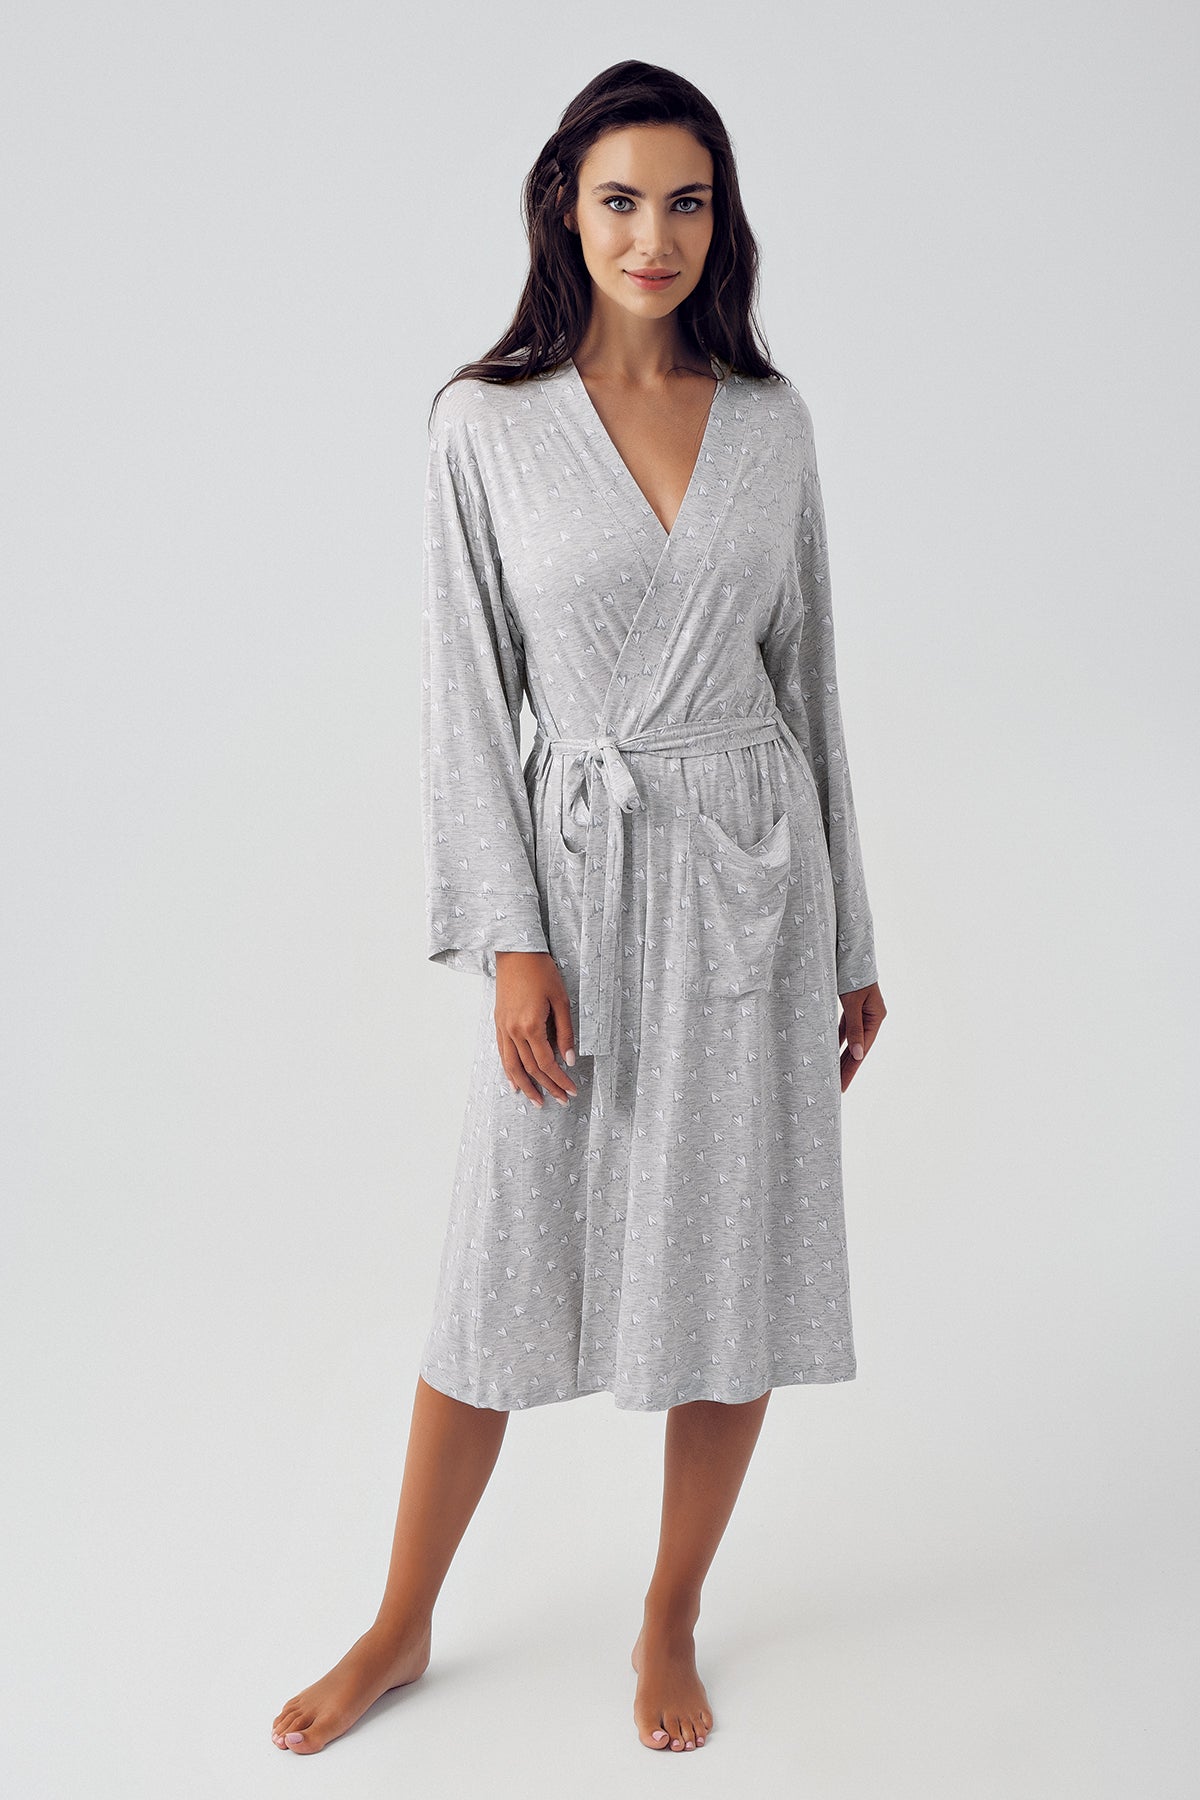 Shopymommy 15302 Double Breasted 3-Pieces Maternity & Nursing Pajamas With Polka Dot Robe Grey